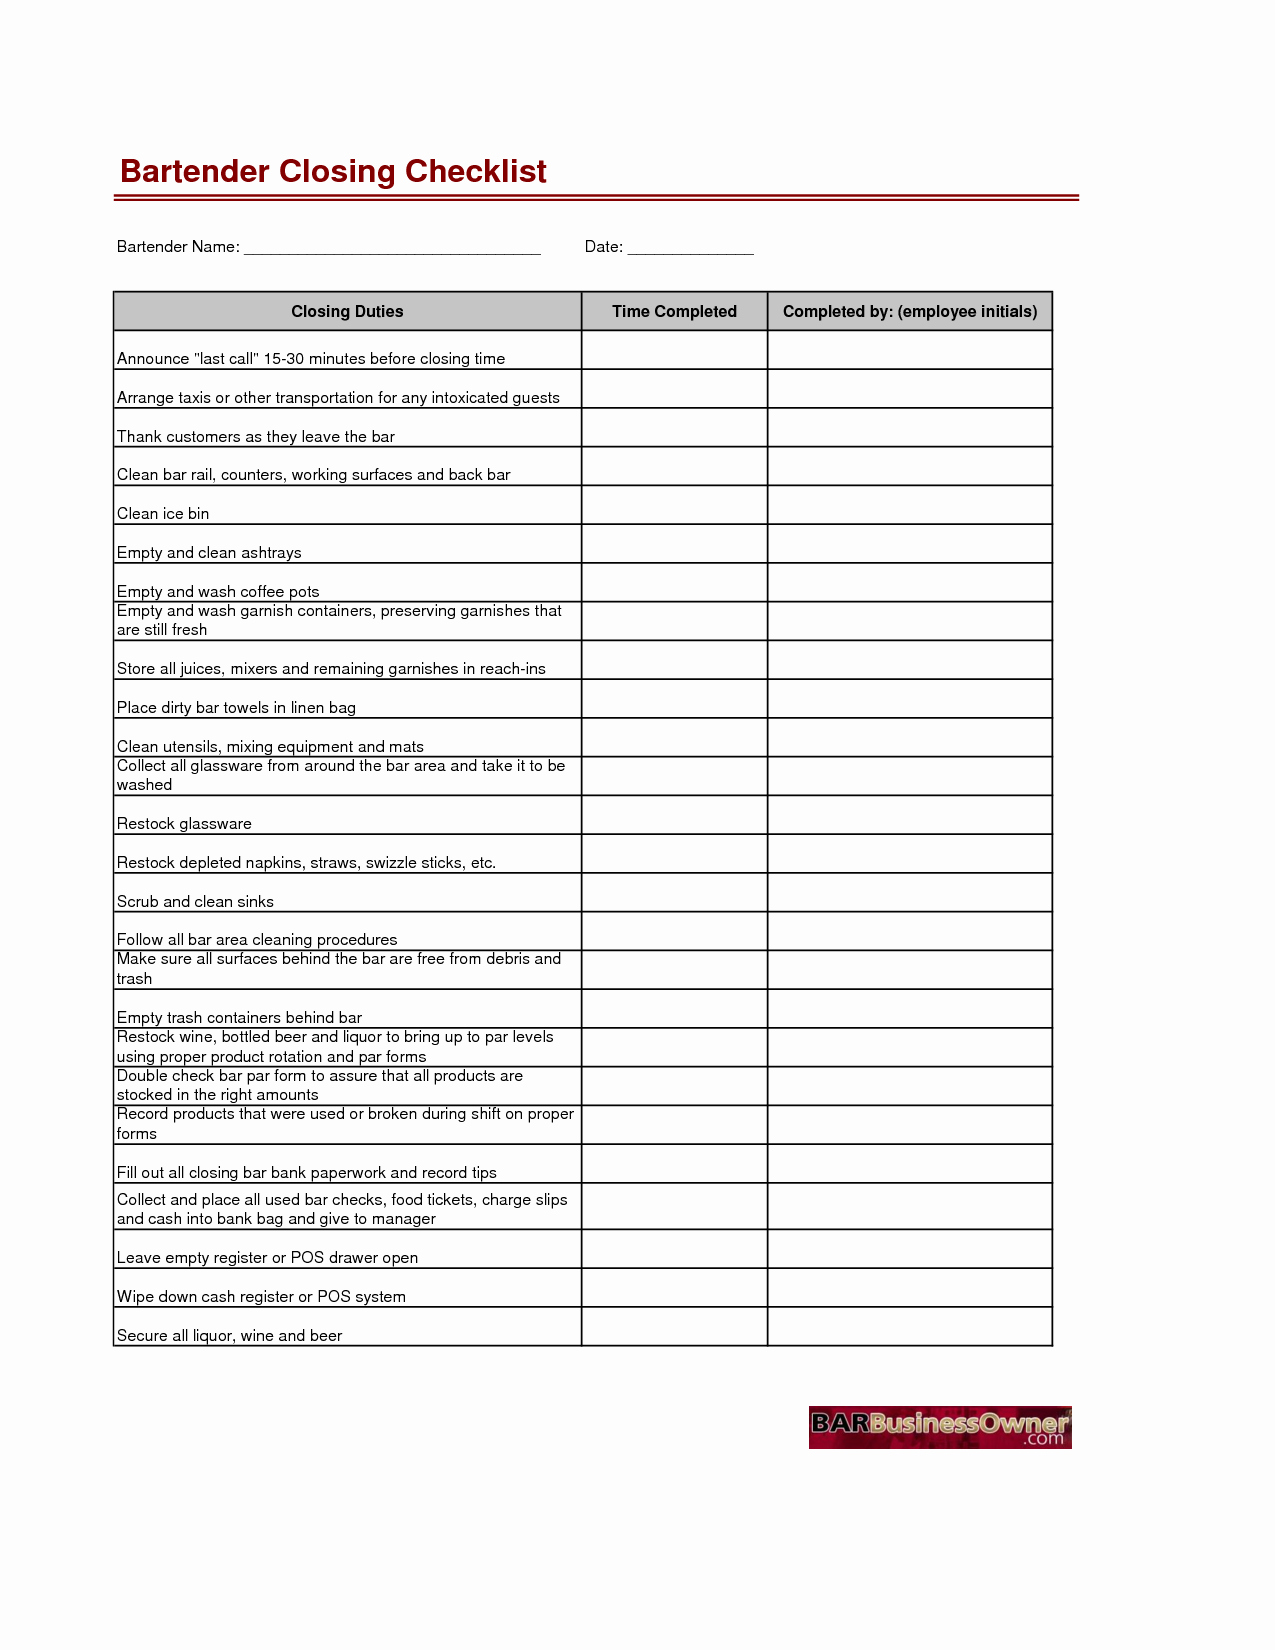 Restaurant Cleaning Checklist Template Awesome Duty Checklist Templates Google Search